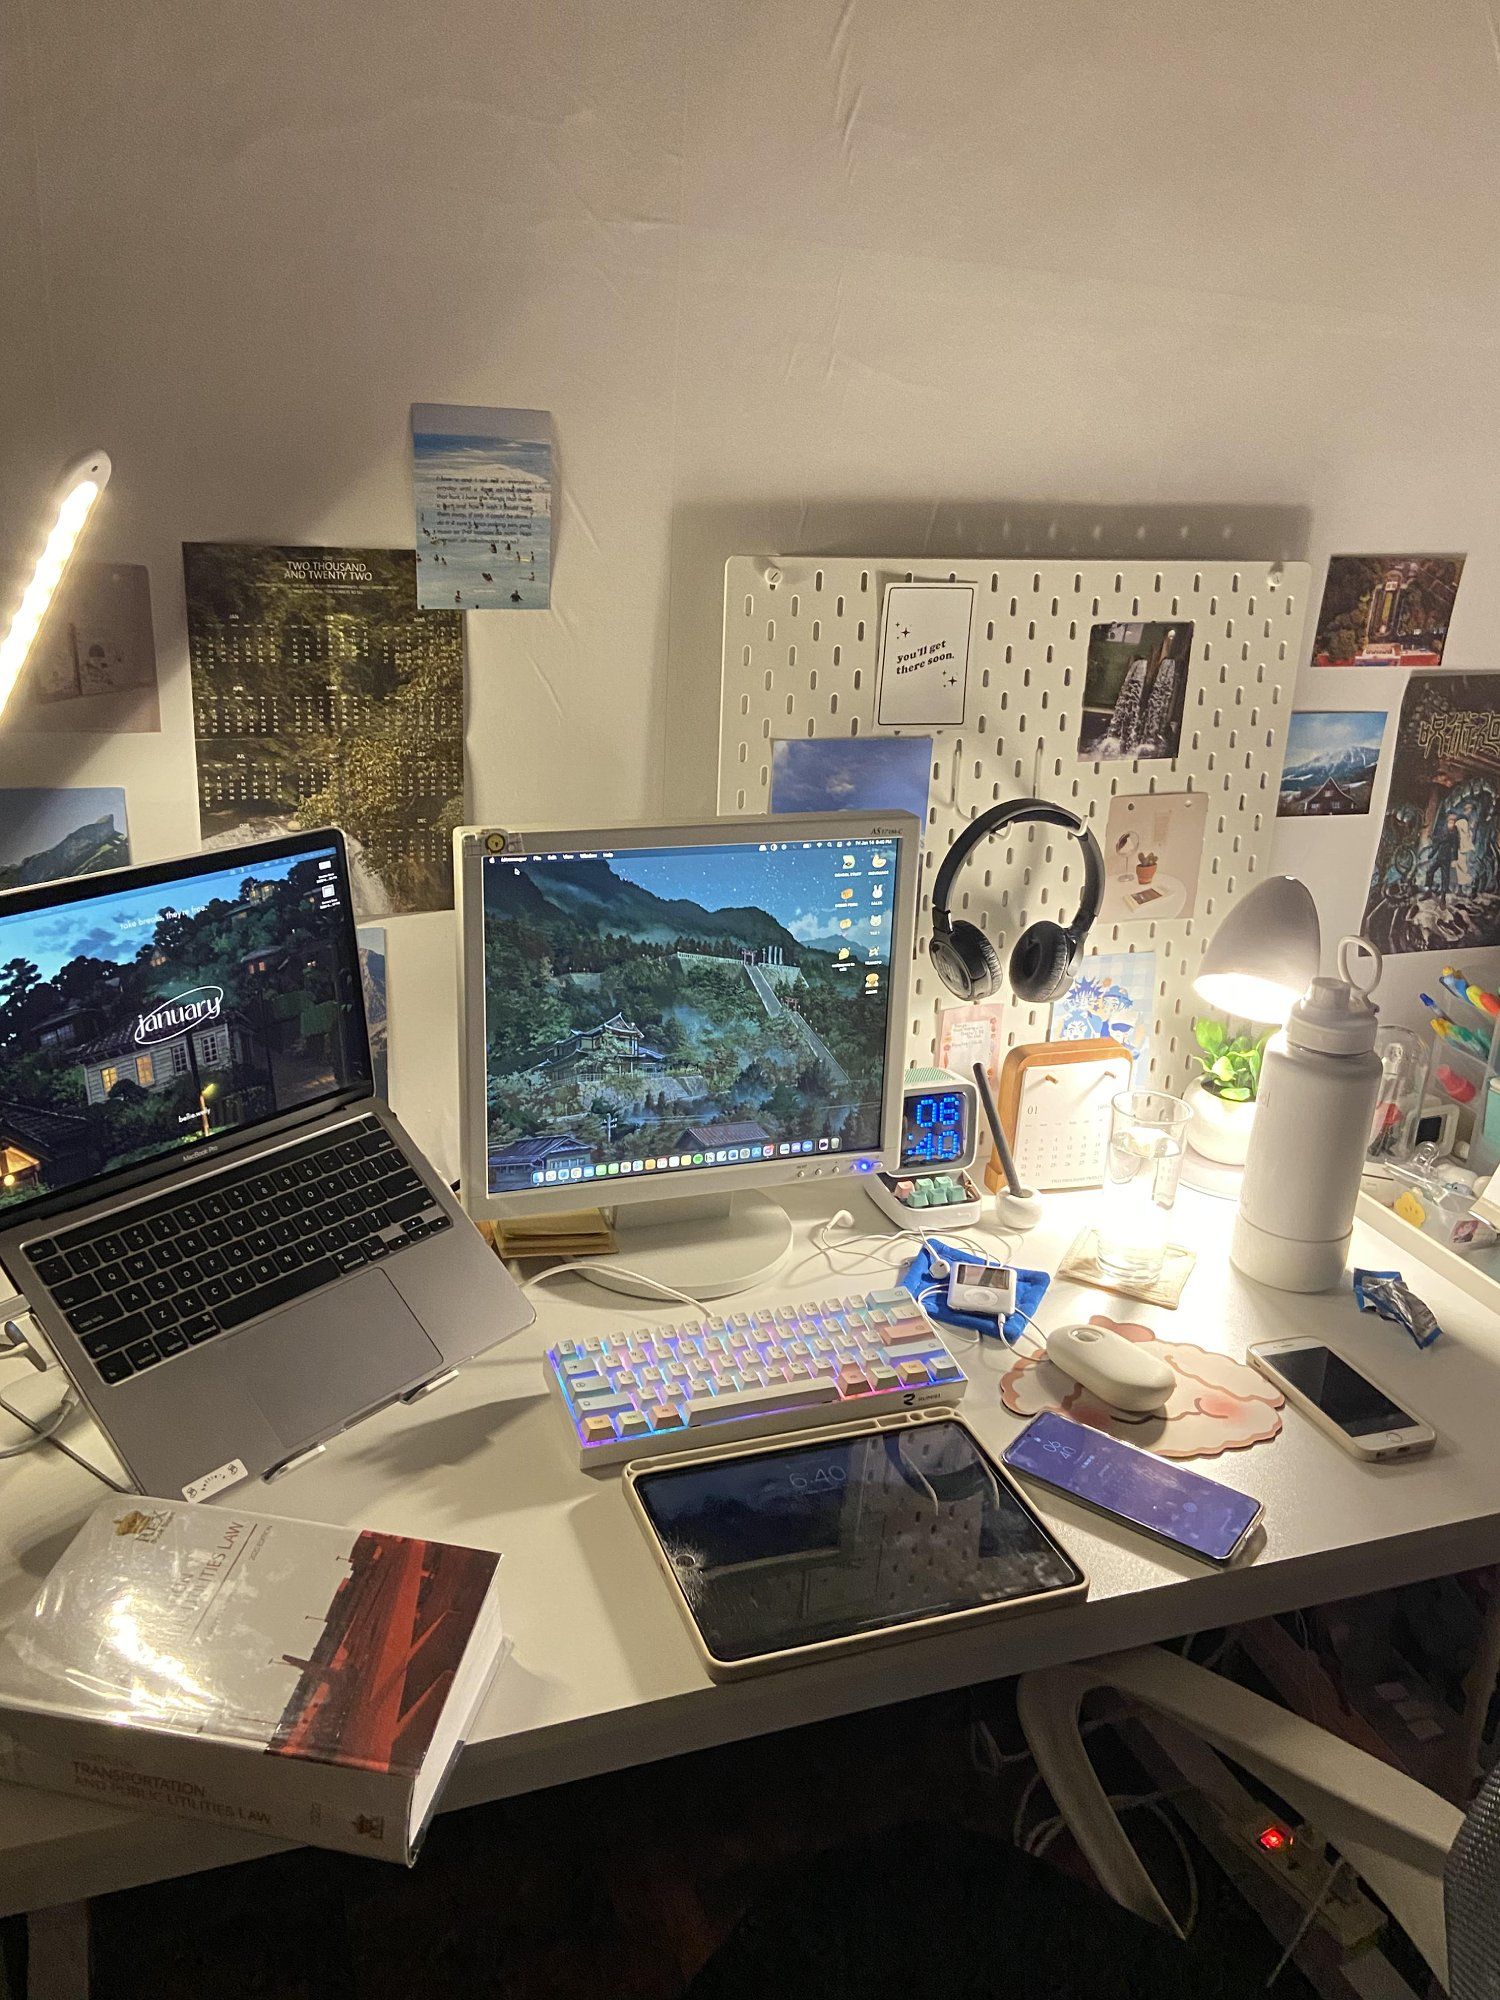 A cluttered home workspace